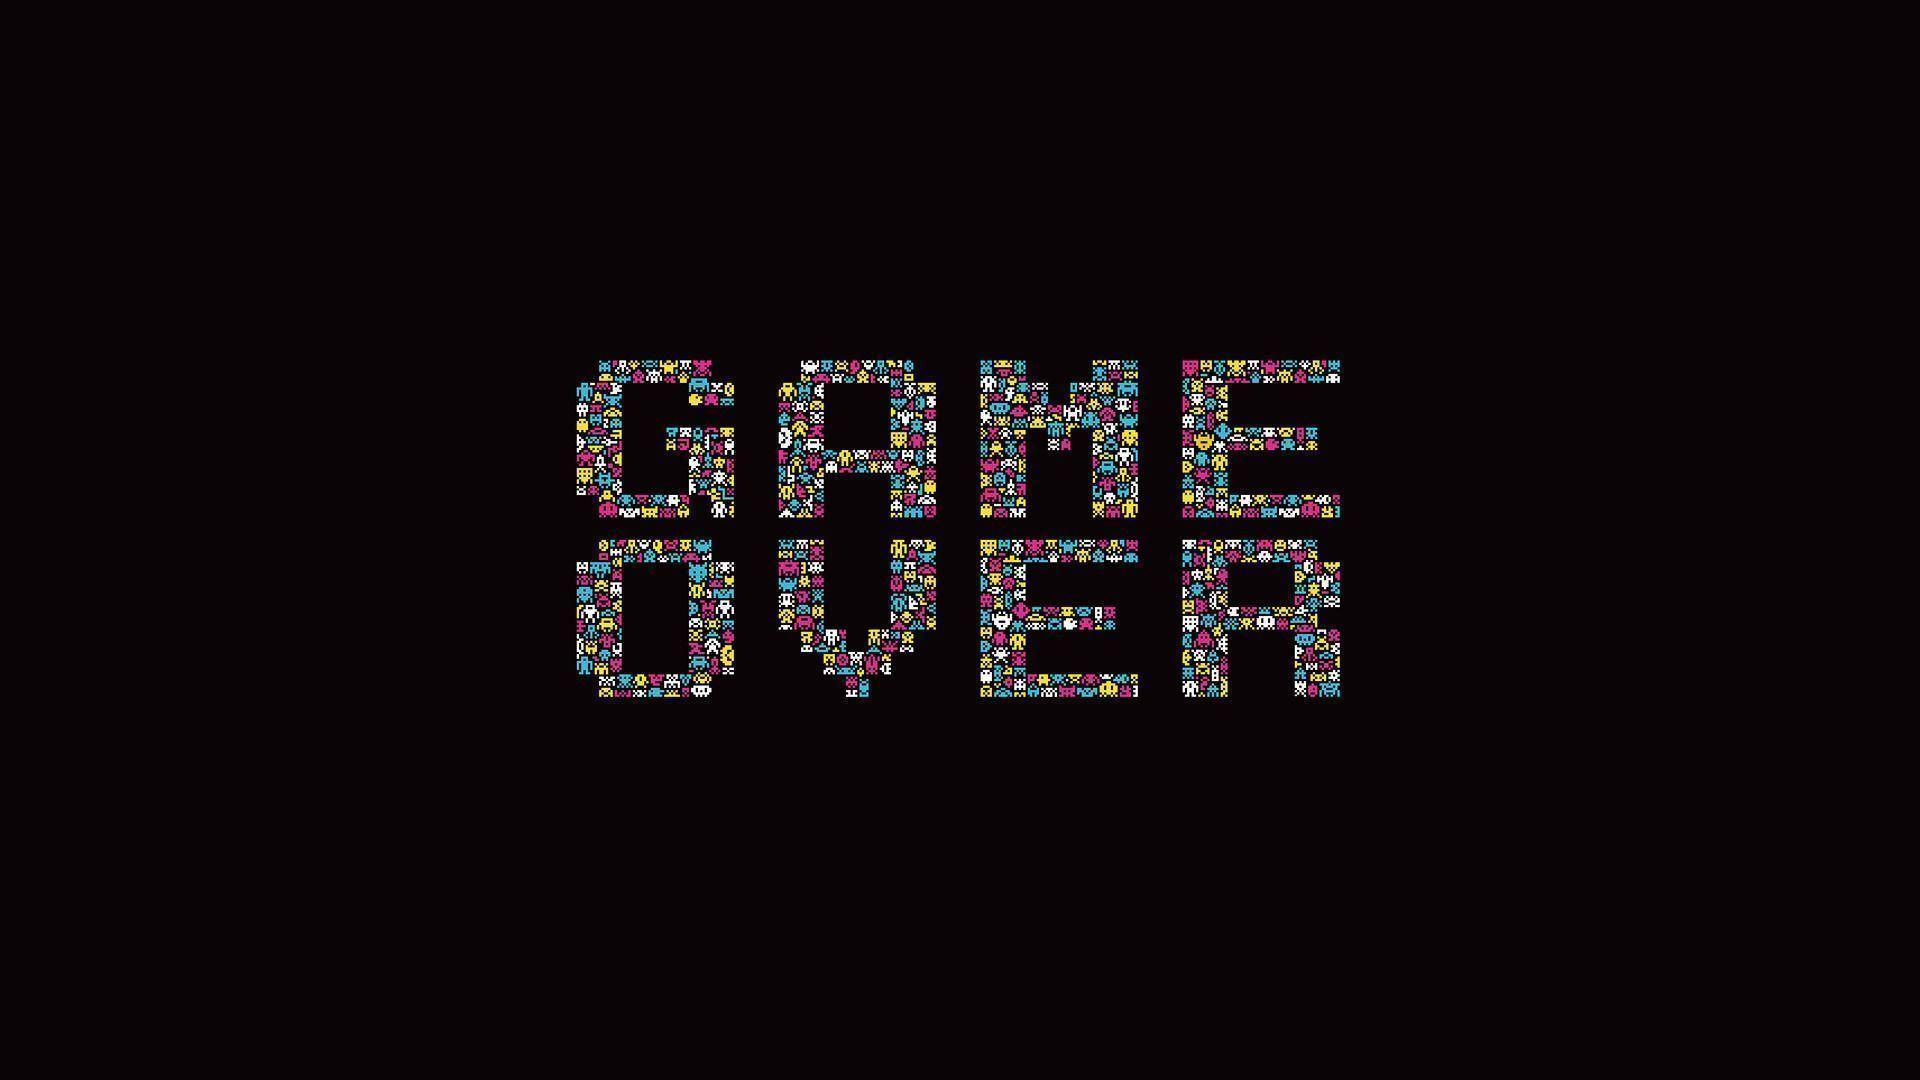 Game Over Wallpapers - Top Free Game Over Backgrounds - WallpaperAccess